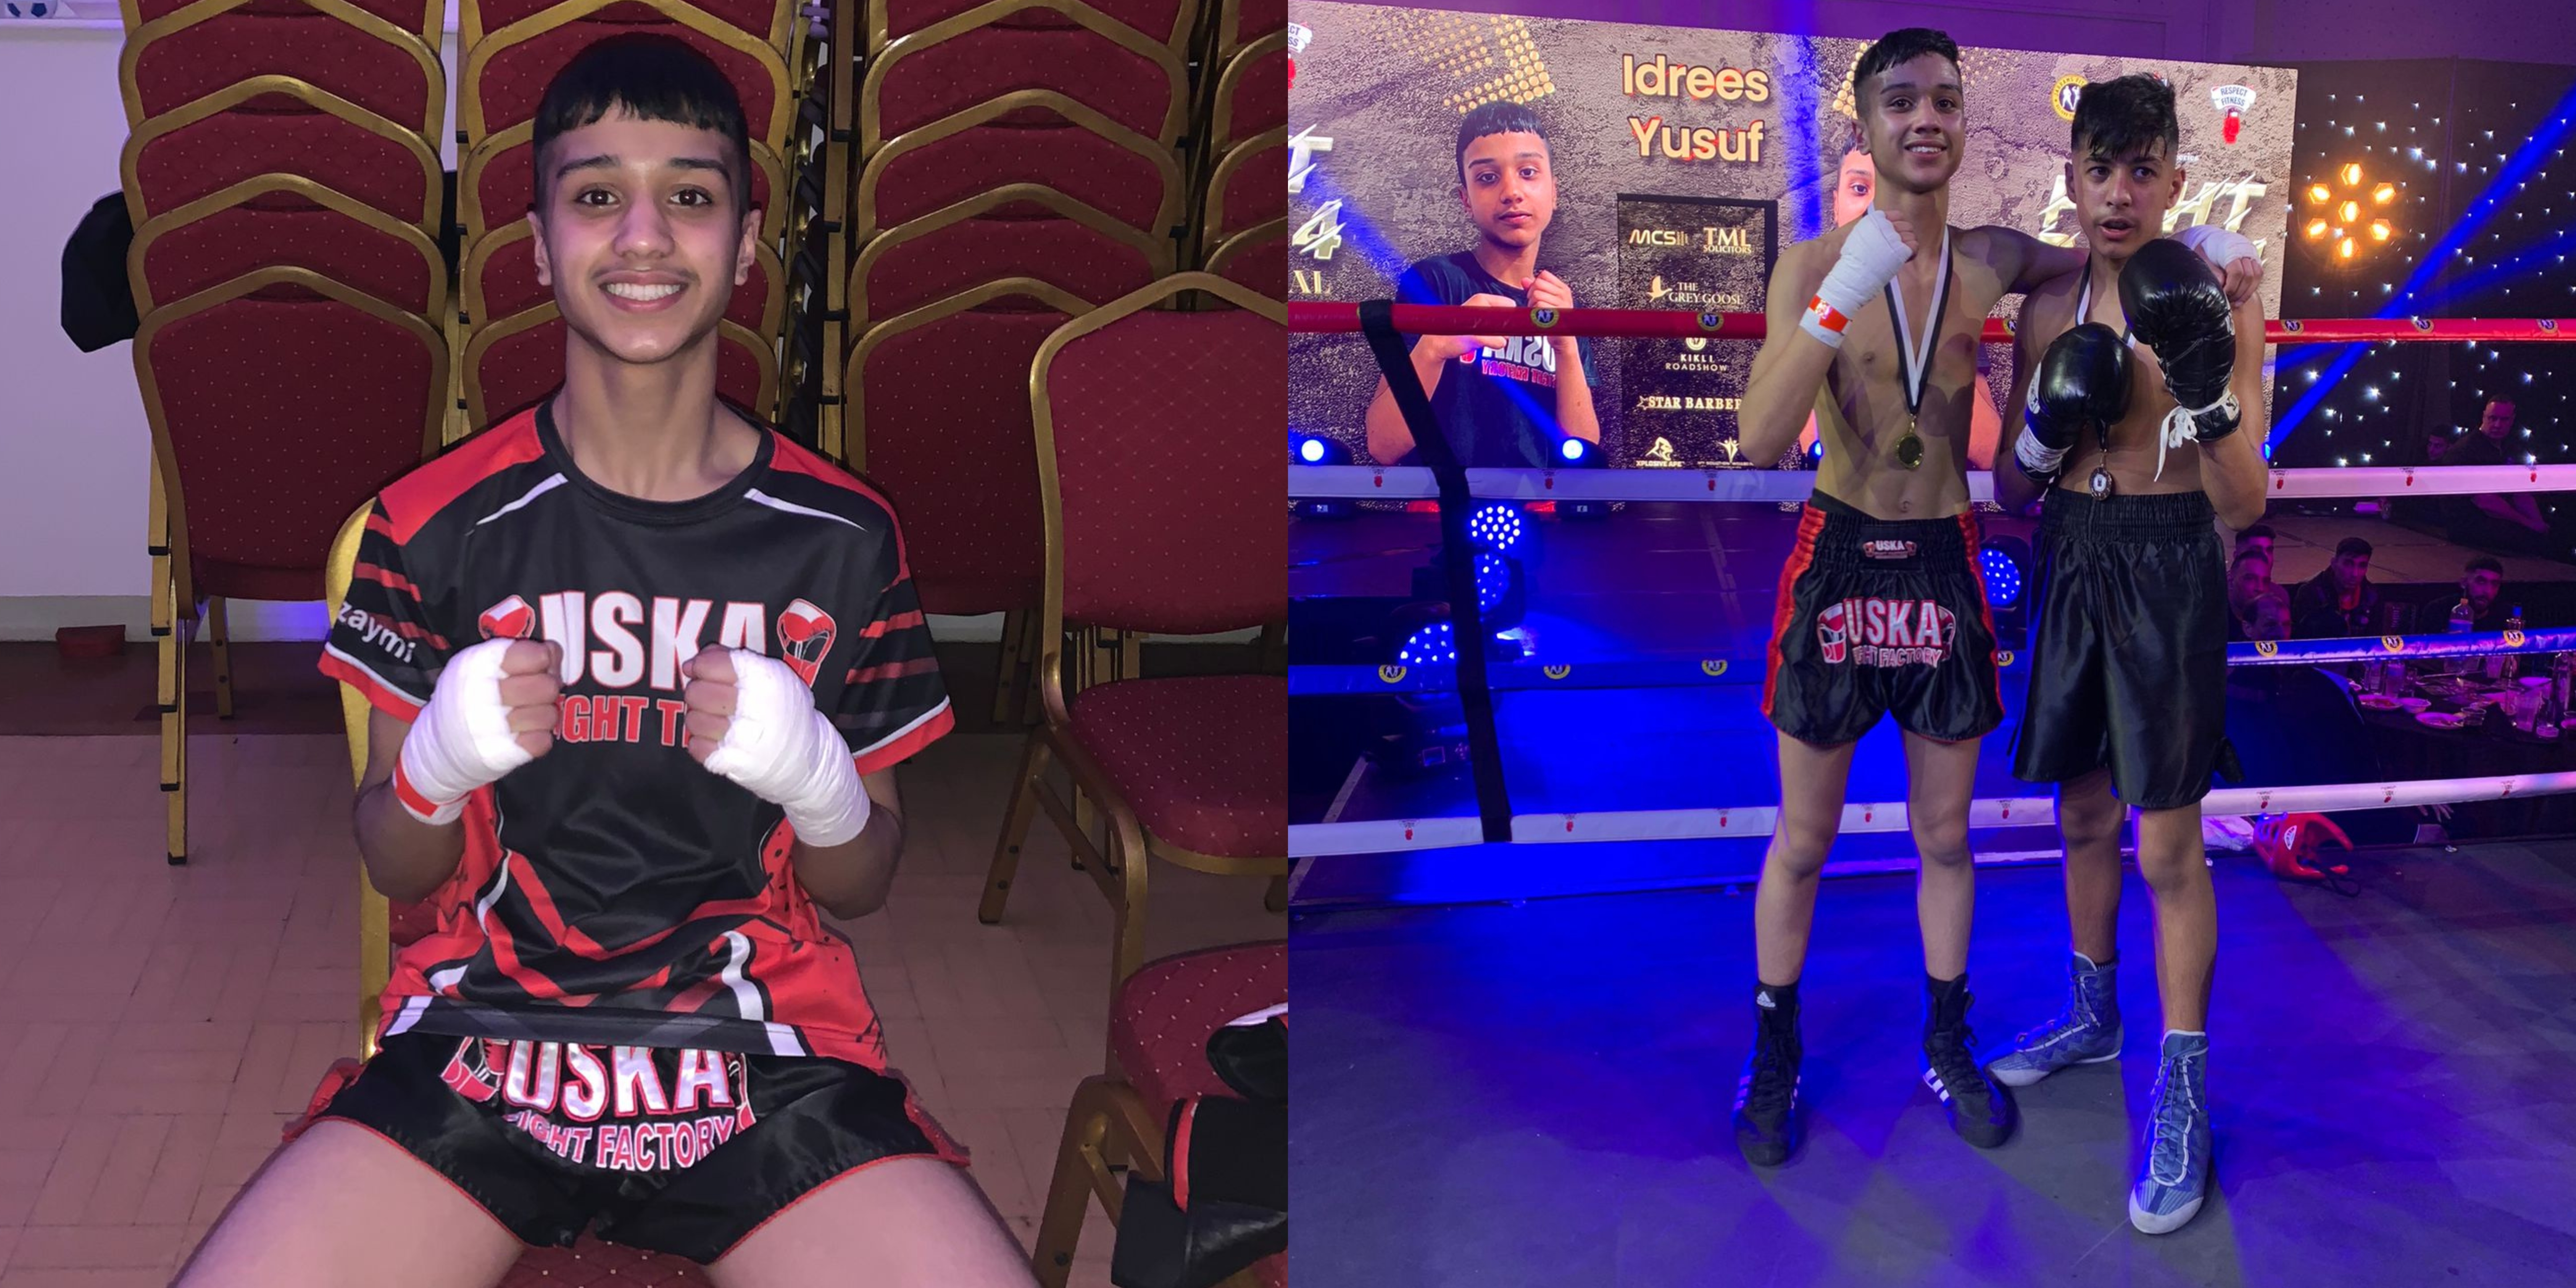 18-03-23 - Idrees Yusuf shines at short notice on Charity Boxing Event